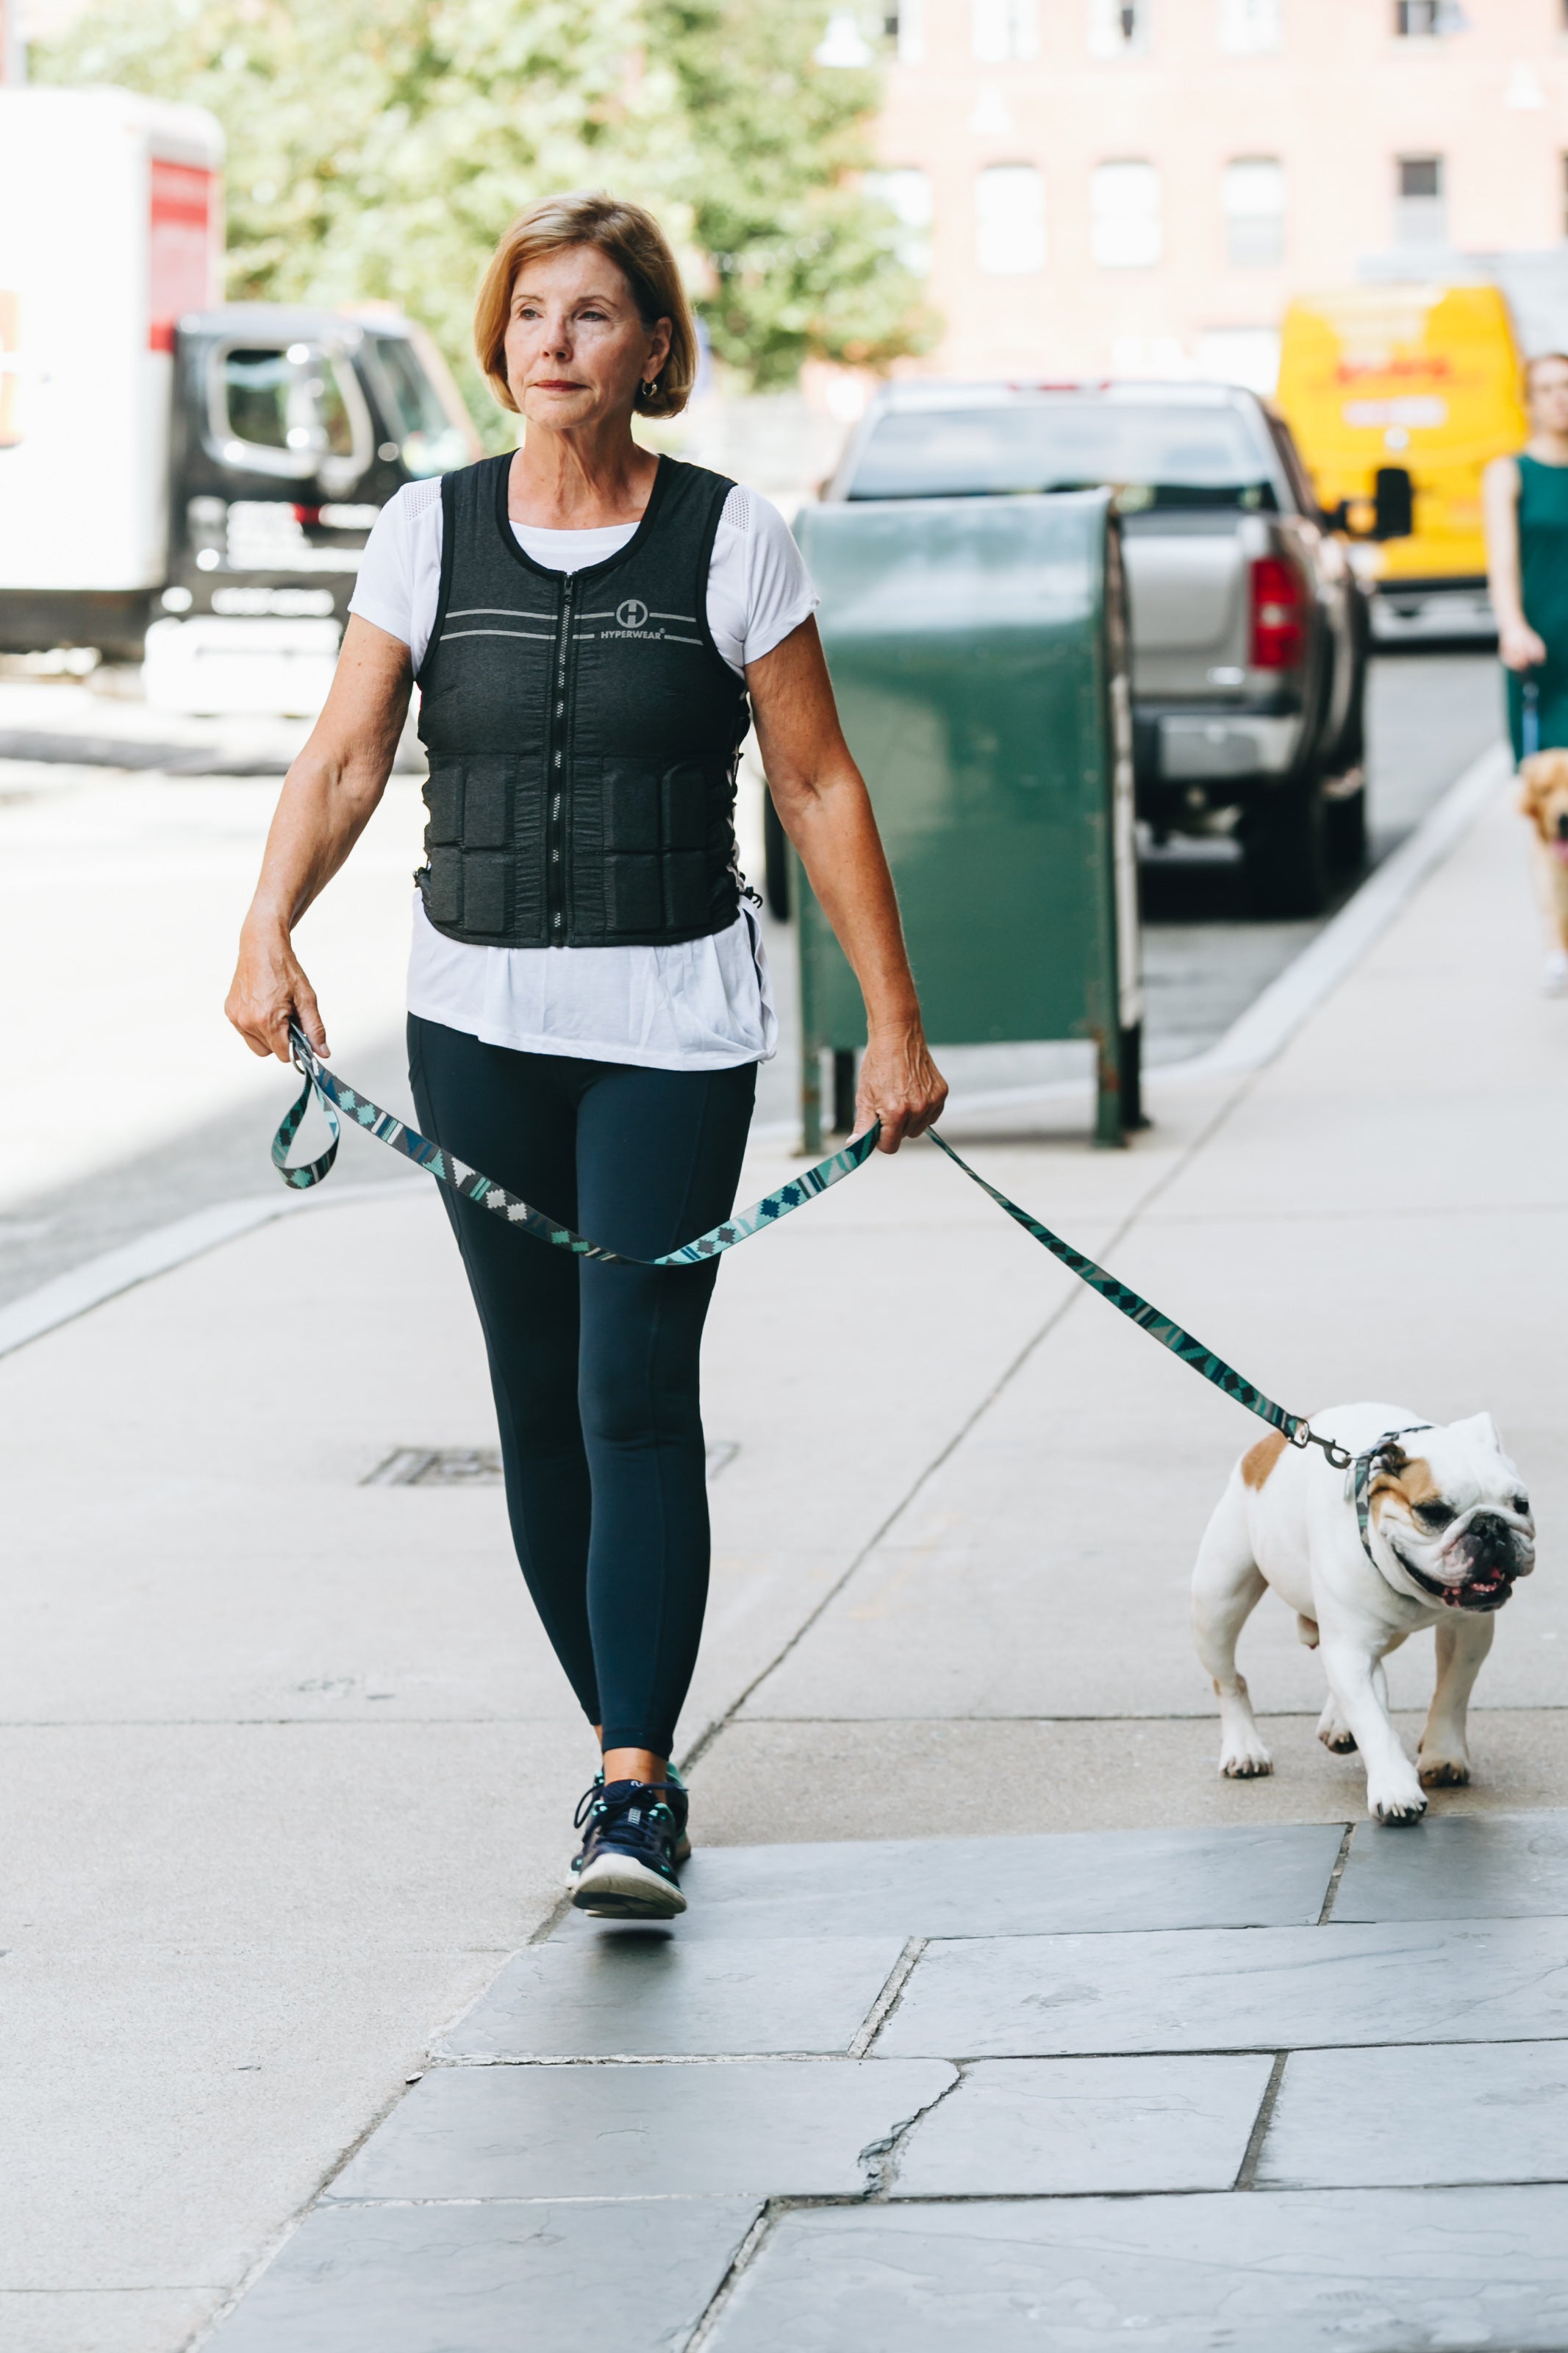 An woman walks her bulldog down a city street while wearing a grey hyper vest fit weighted vest for women to build bone density